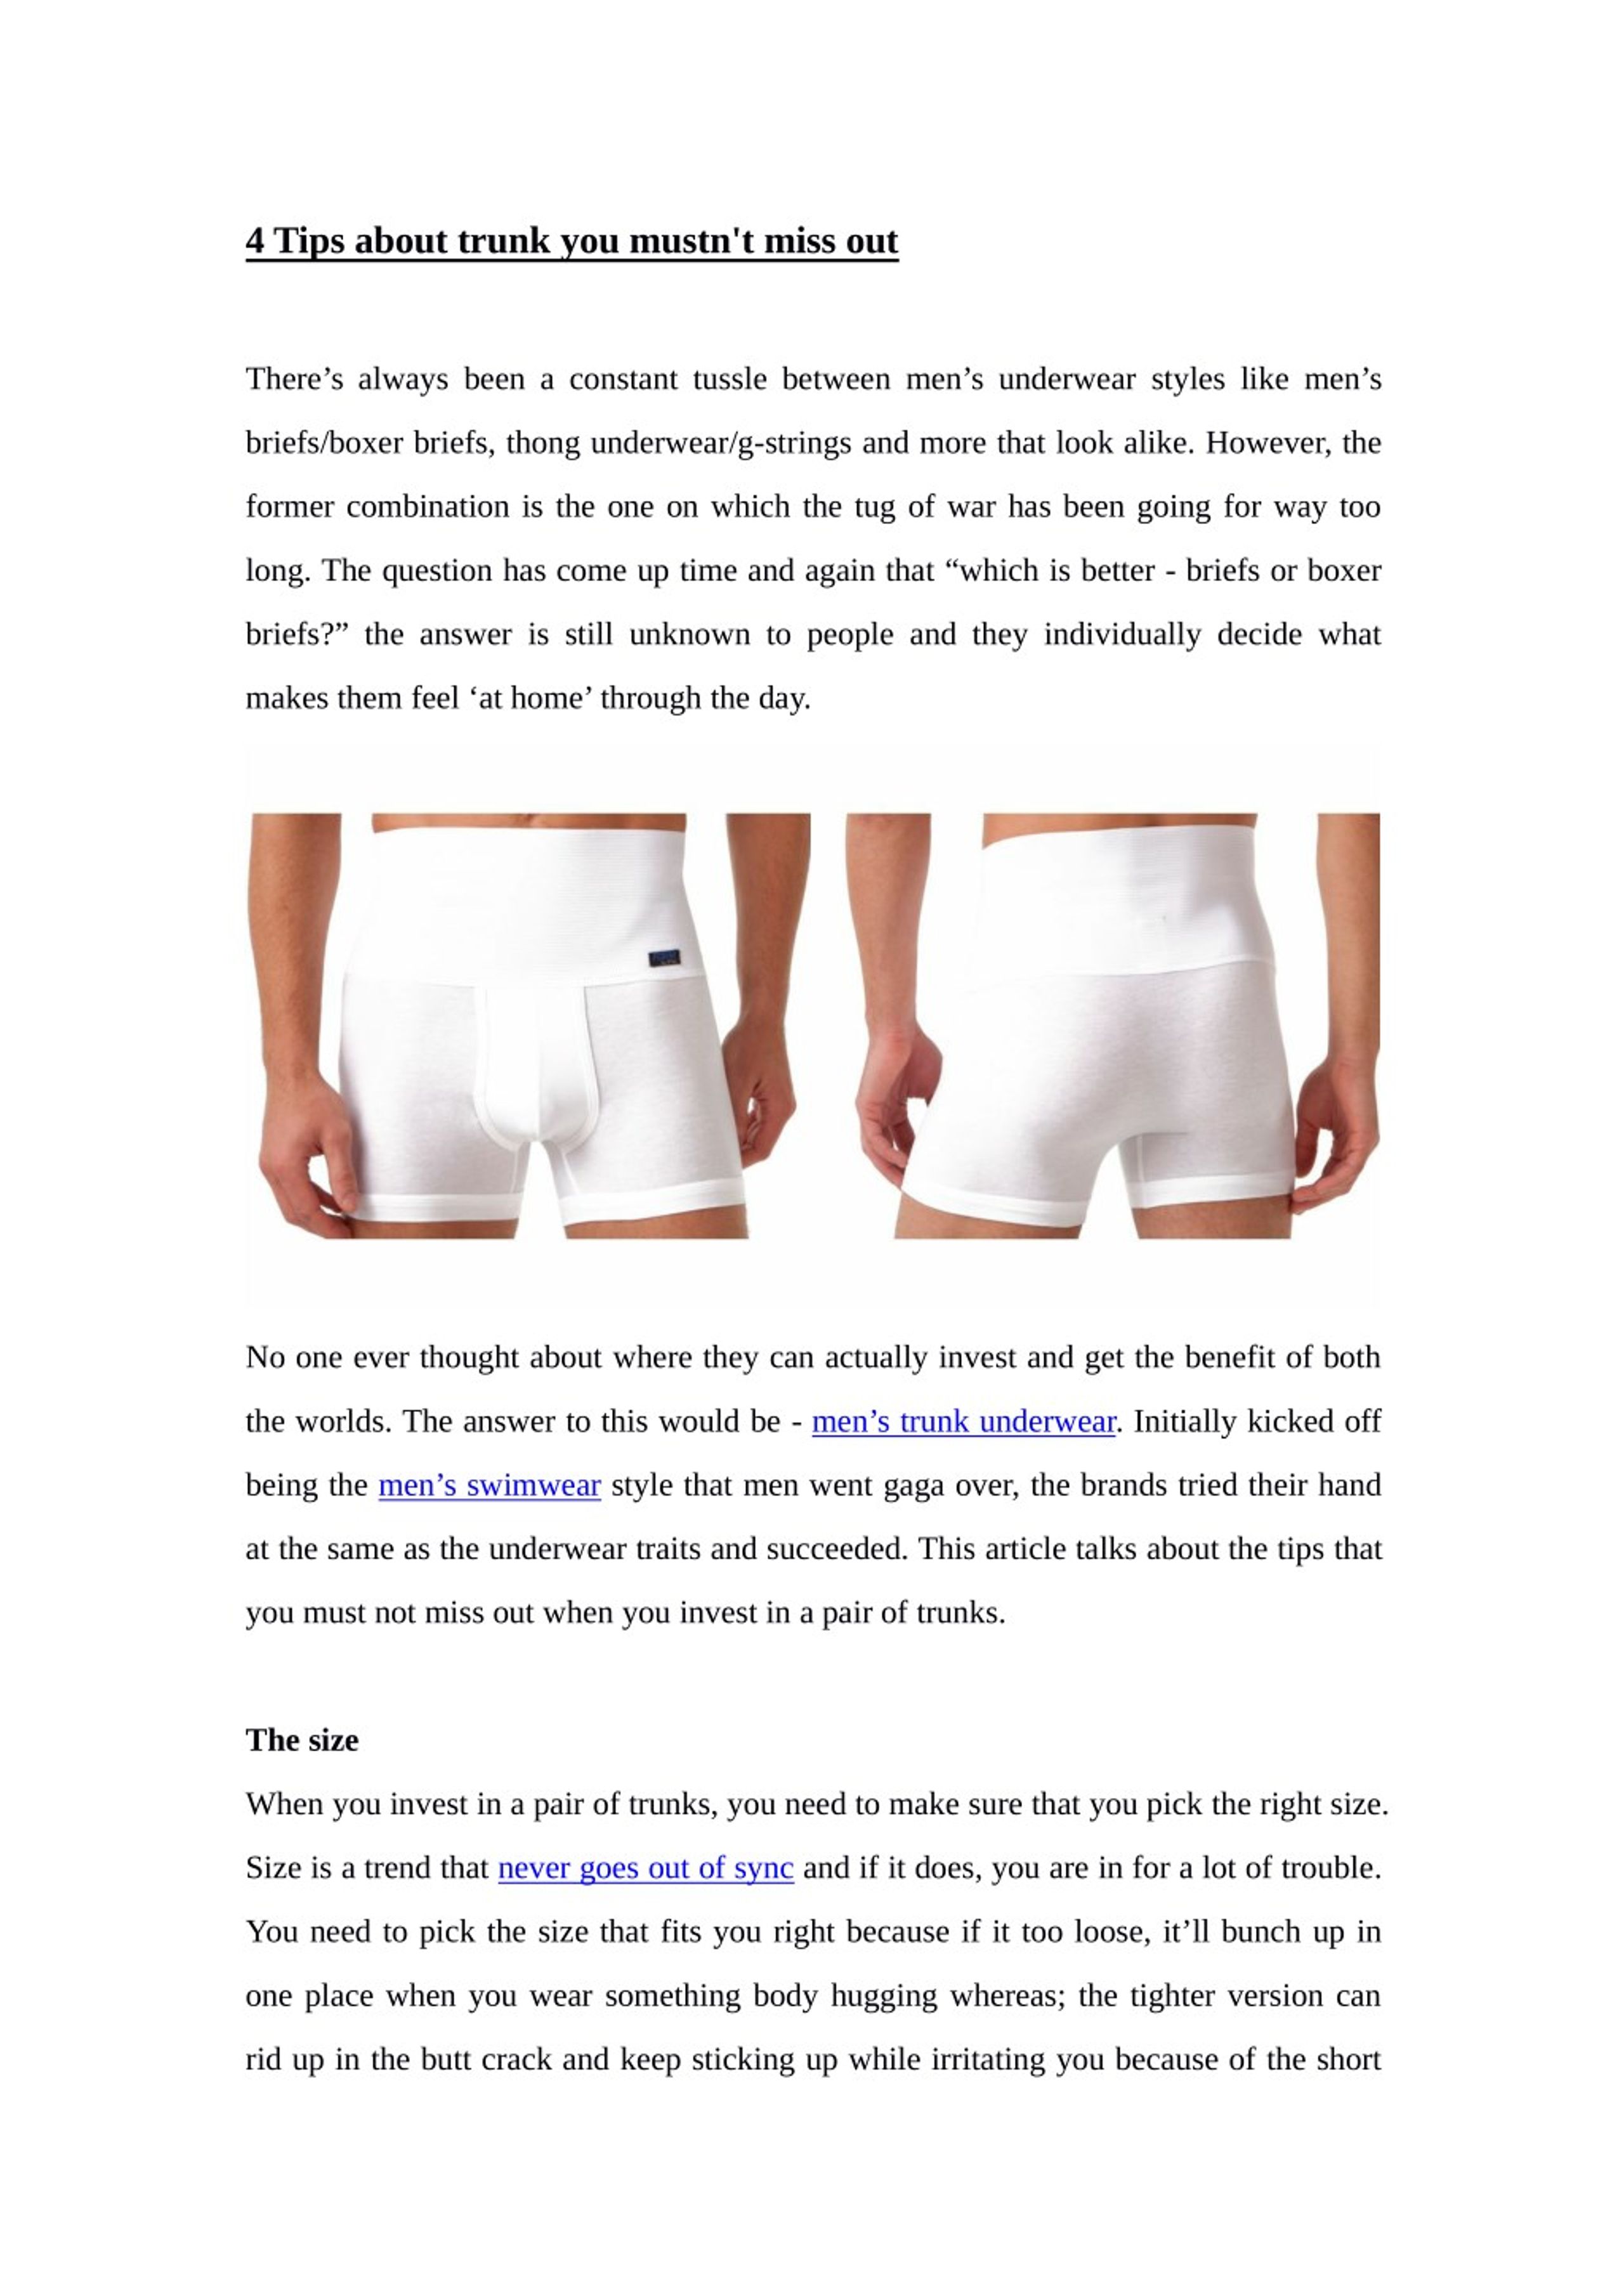 Some Tips To Prevent Your Underwear From Showing – Mensuas